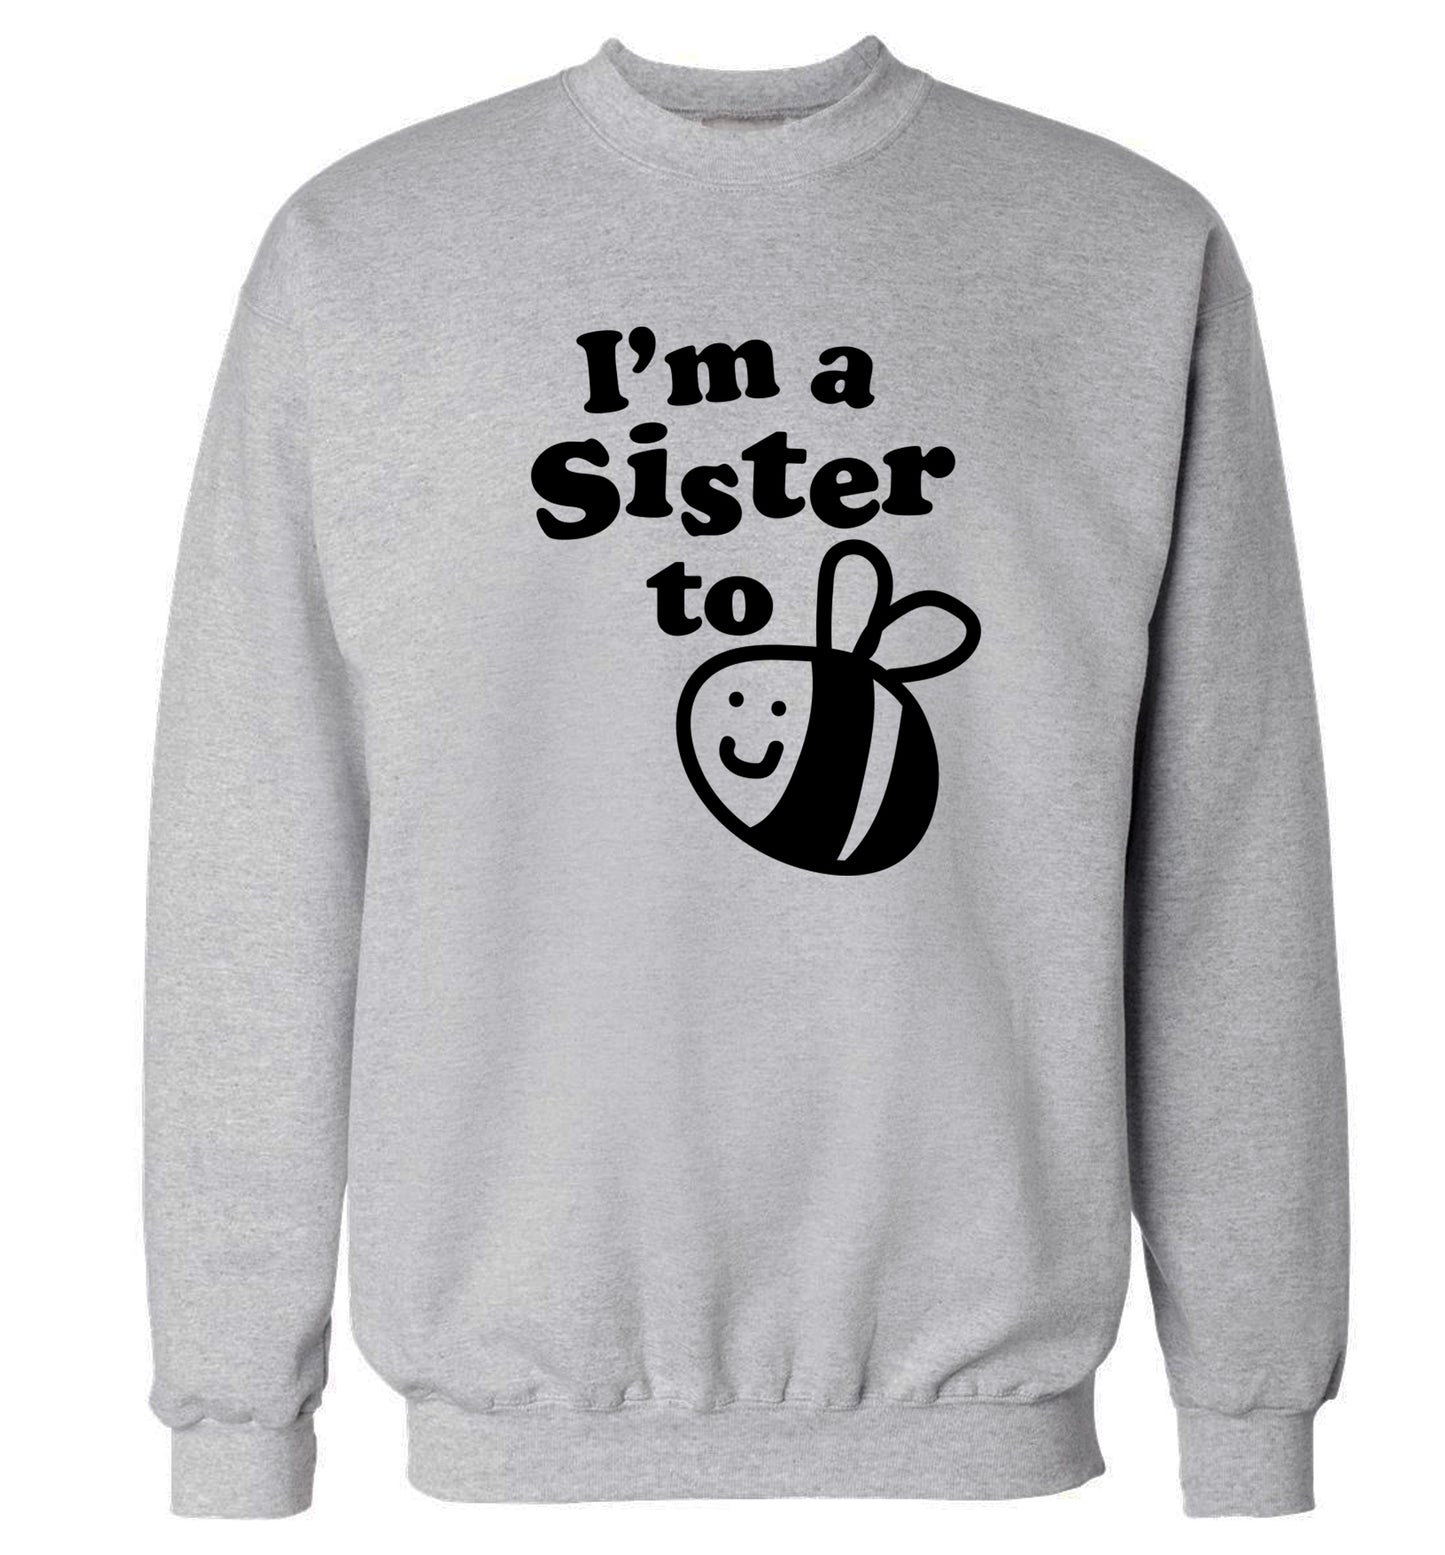 I'm a sister to be Adult's unisex grey Sweater 2XL